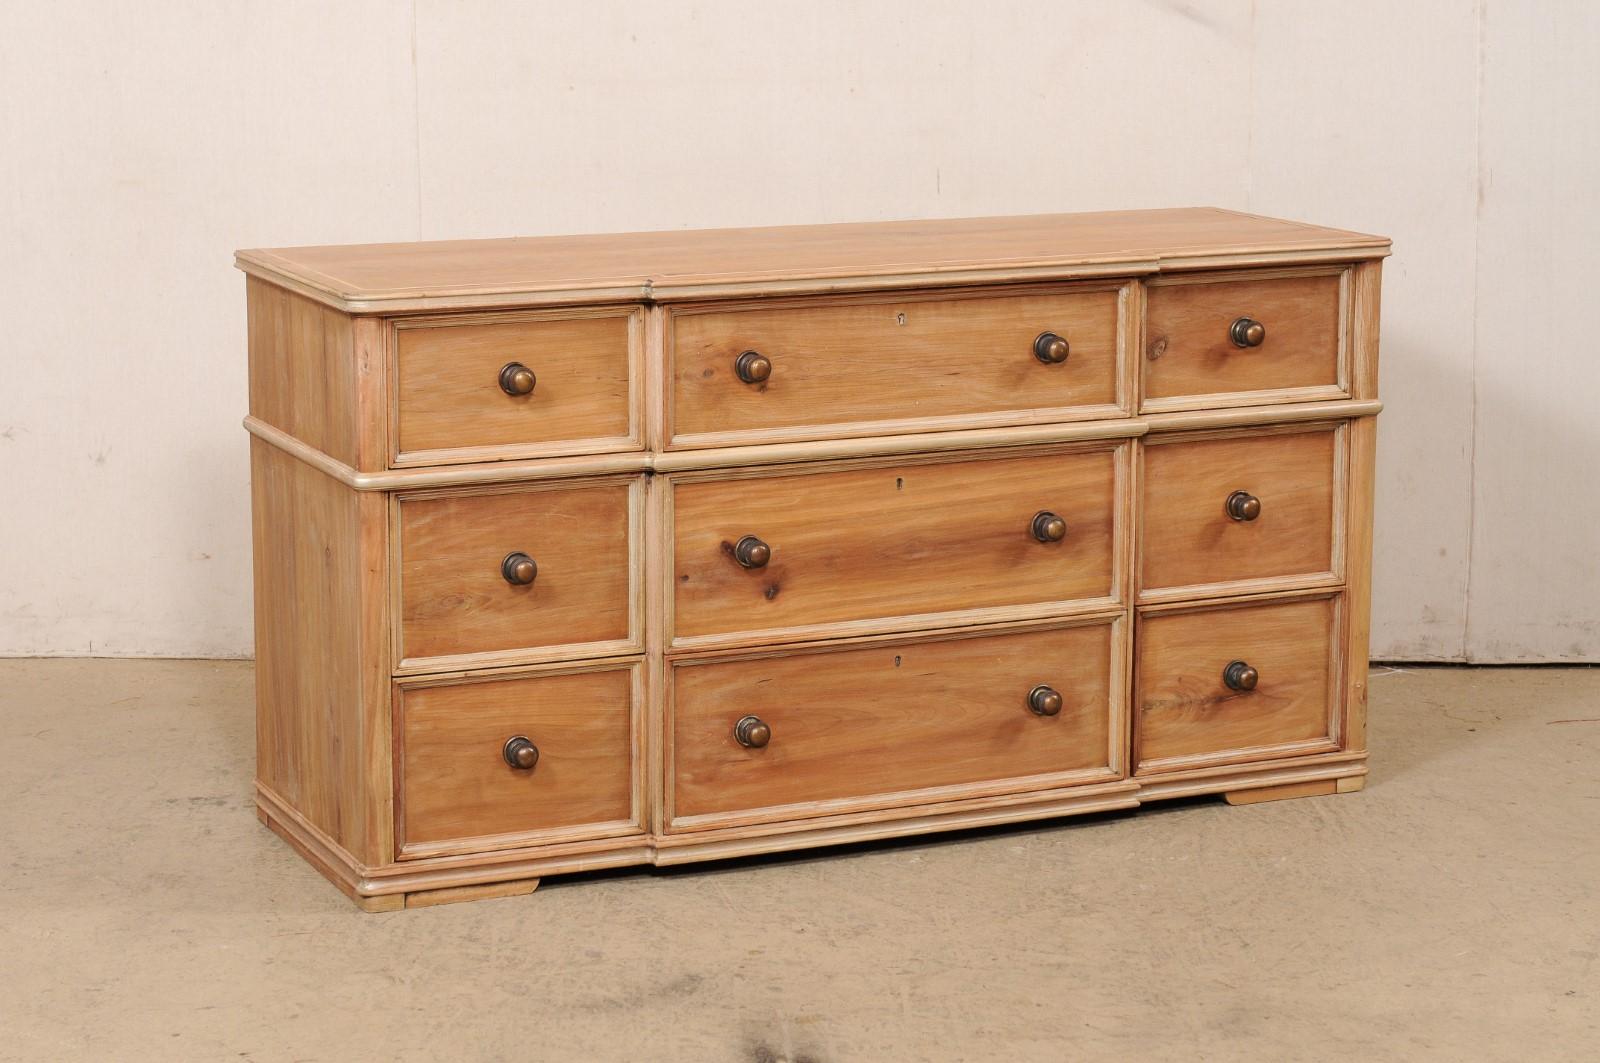 A vintage American bleached wood chest of nice drawers. This larger-sized case has a shallow break-front design, and features a case that houses nine drawers total, made up of three horizontal rows; each row having a pair of smaller end-drawers